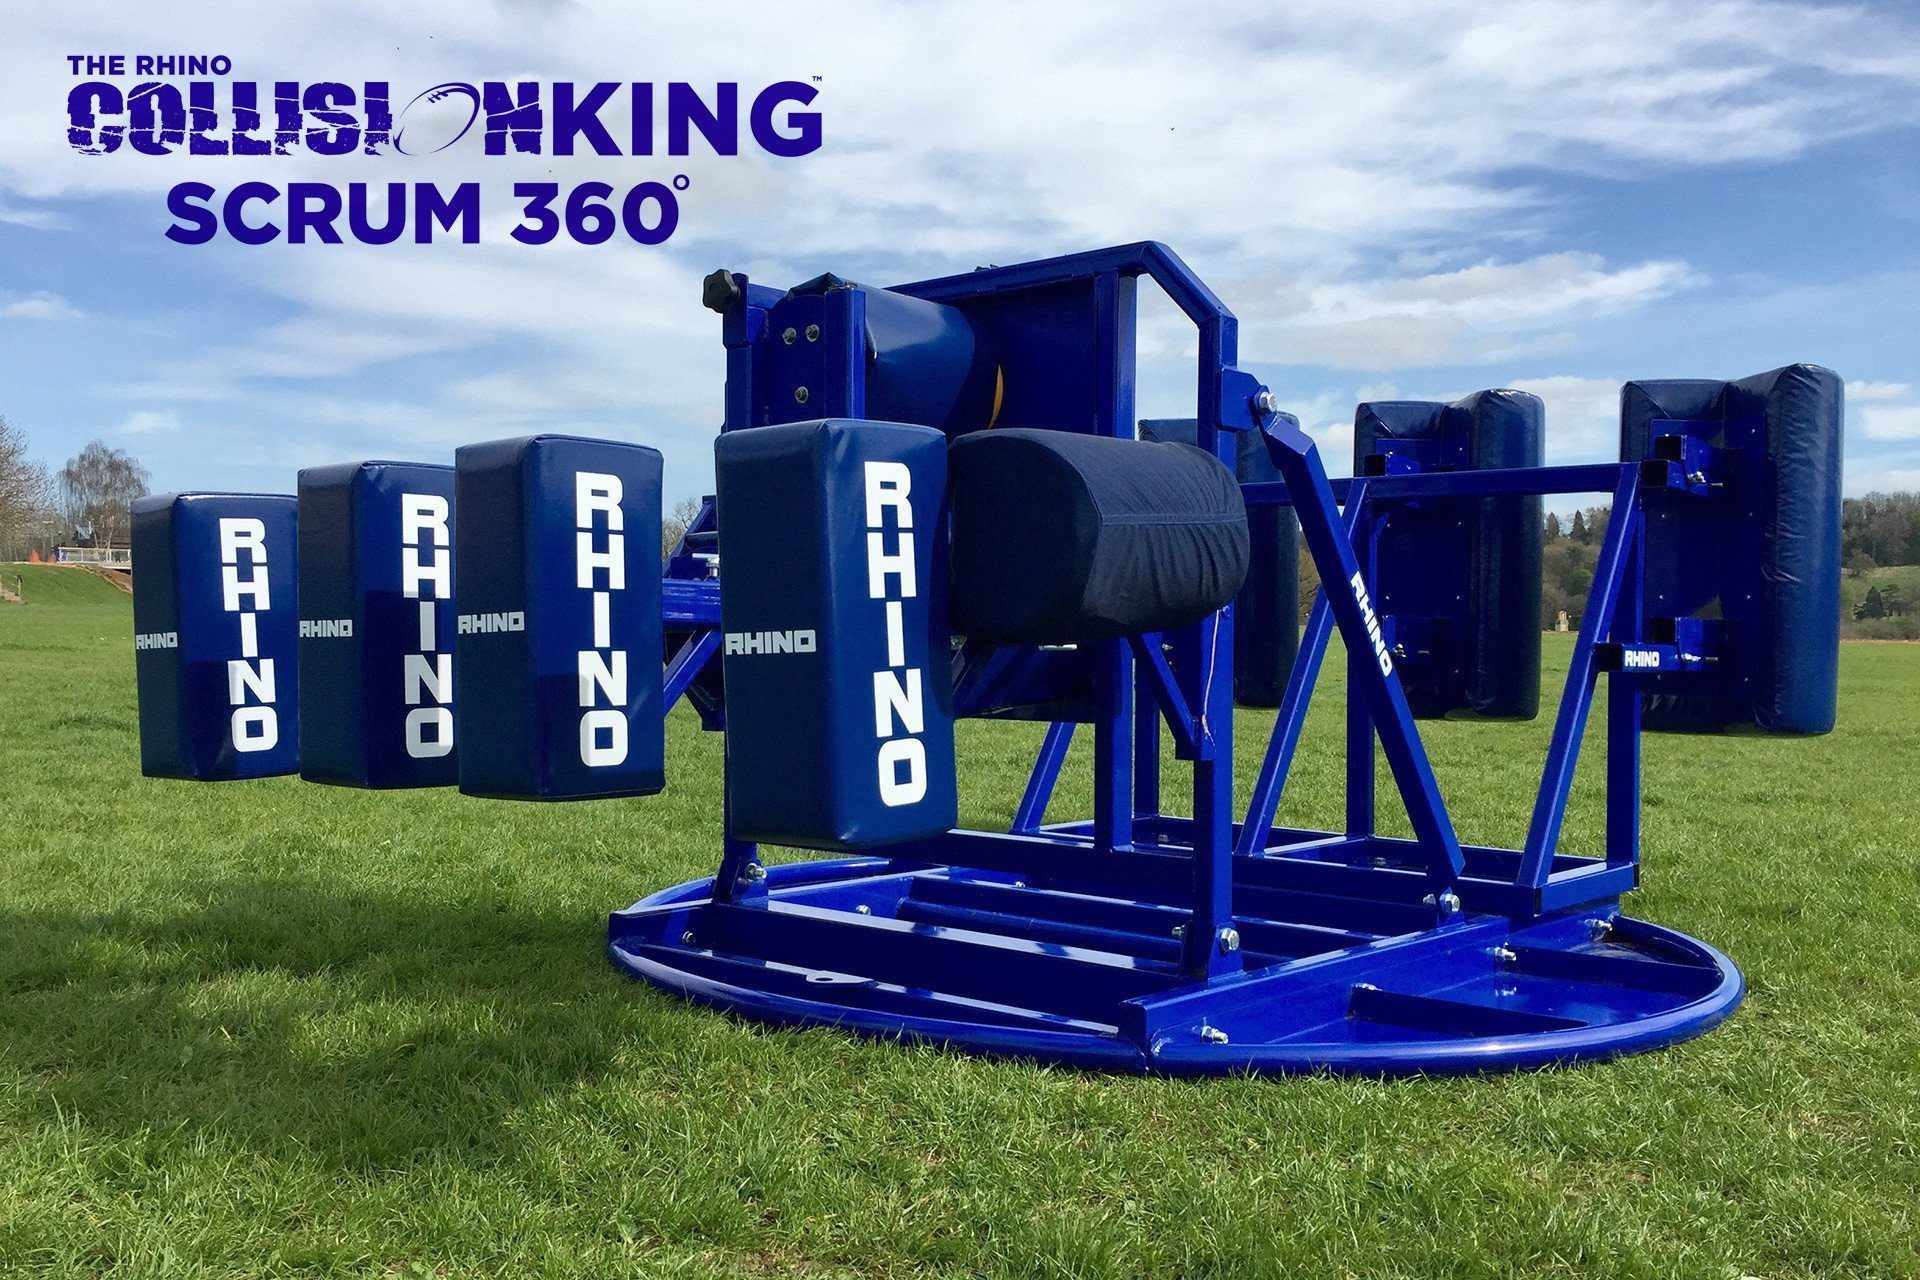 Introducing the all-new Rhino Scrum 360